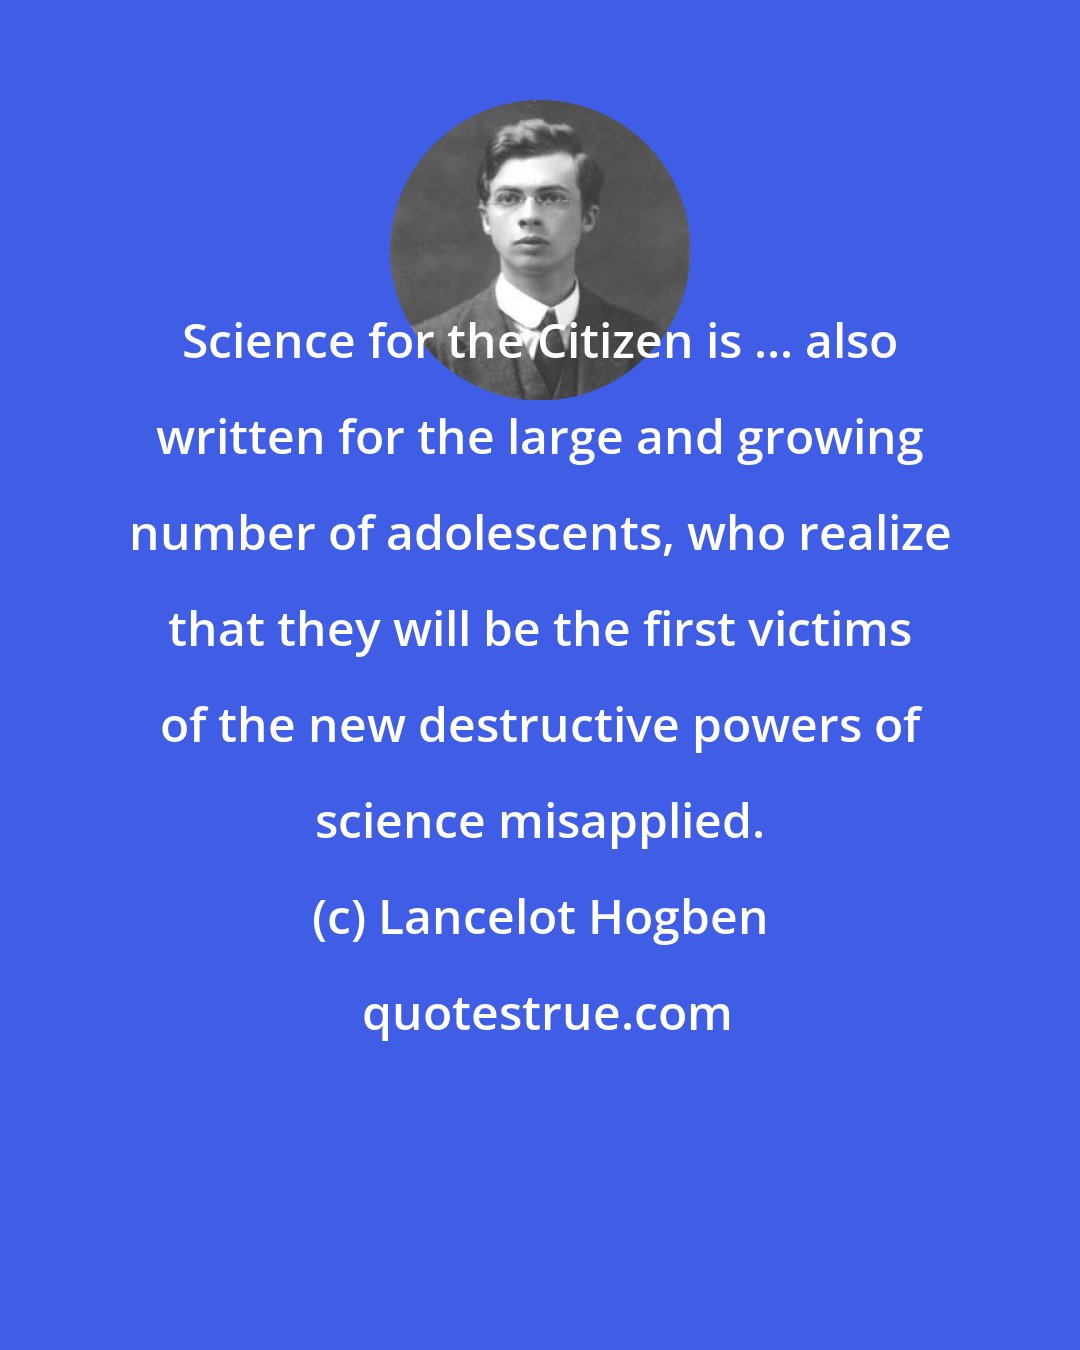 Lancelot Hogben: Science for the Citizen is ... also written for the large and growing number of adolescents, who realize that they will be the first victims of the new destructive powers of science misapplied.